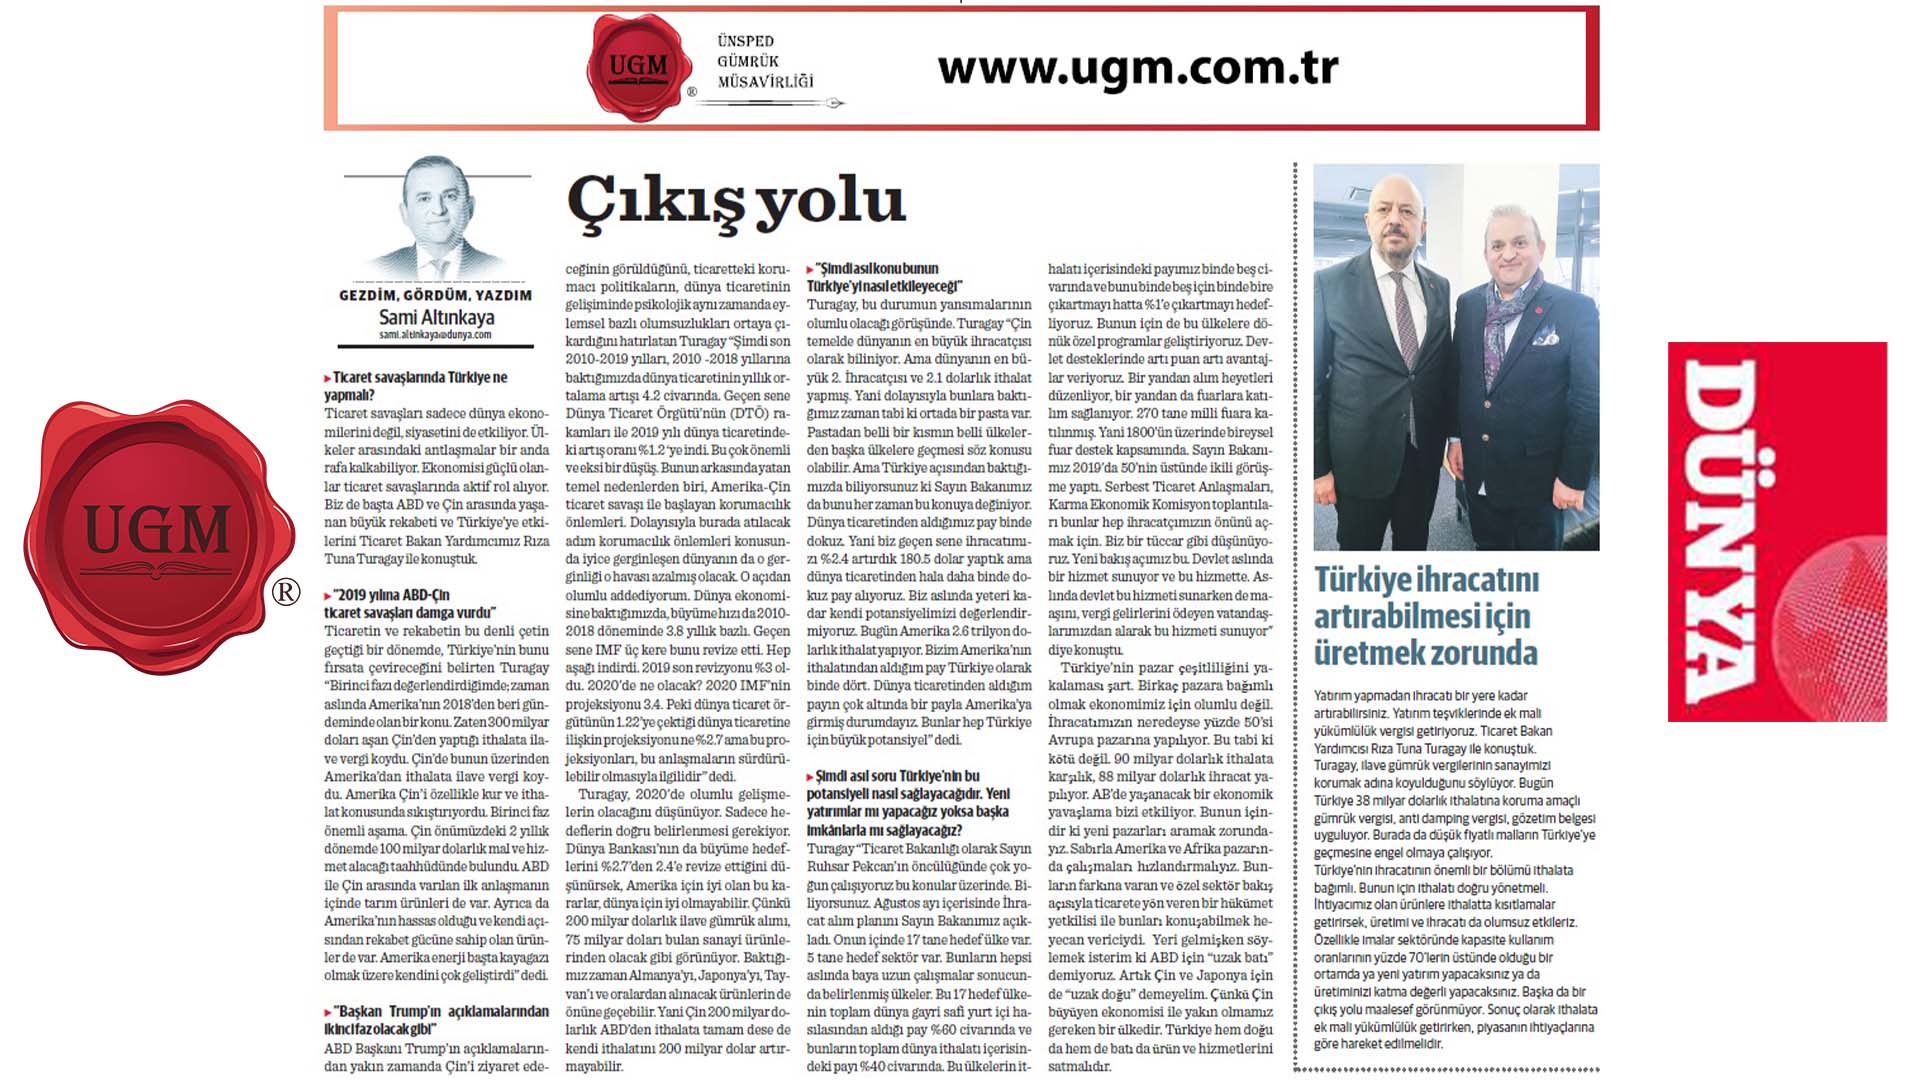 Mr. Sami ALTINKAYA, UGM Director of Corporate Communications, has talked about Trade Wars and the Risks and Opportunities of Turkey with Mr. Rıza Turagay Tuna, Deputy Minister of Commerce.